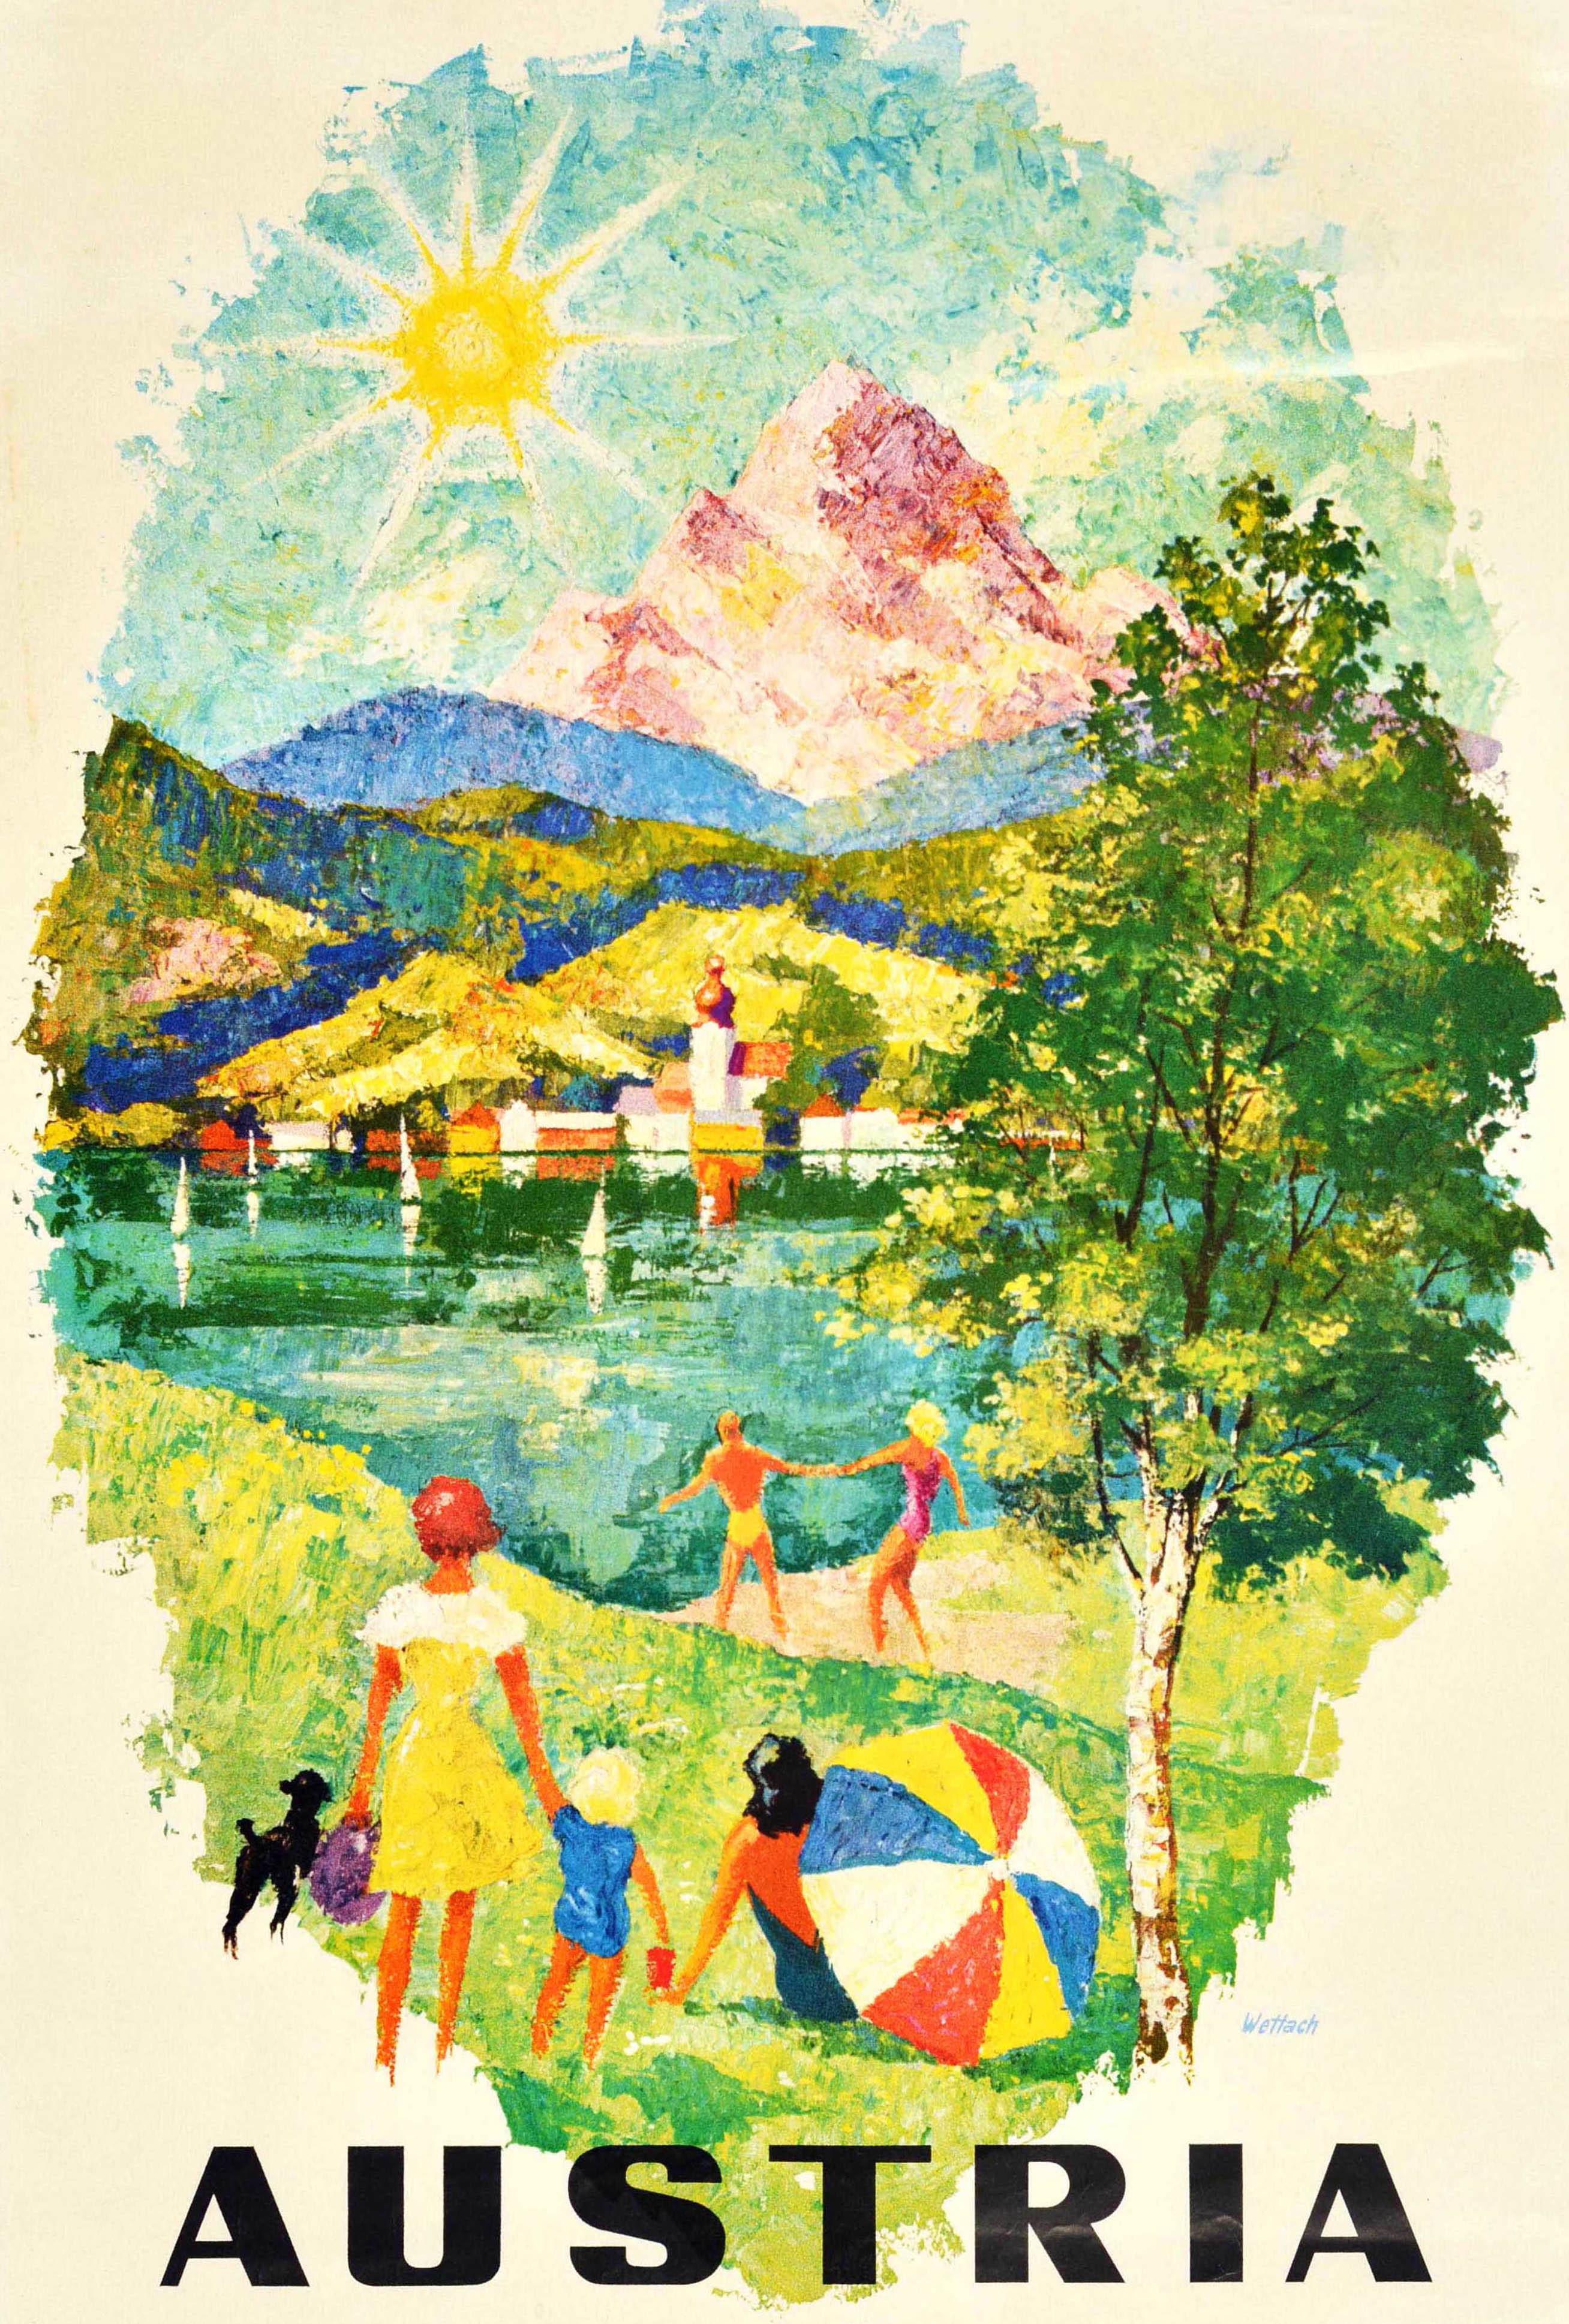 Original vintage travel poster for Austria featuring colourful scenic artwork of people in swimming costumes and a dog in the foreground, with a child holding a bucket, a lady sitting on the grass under the shade of a tree and umbrella, a couple by